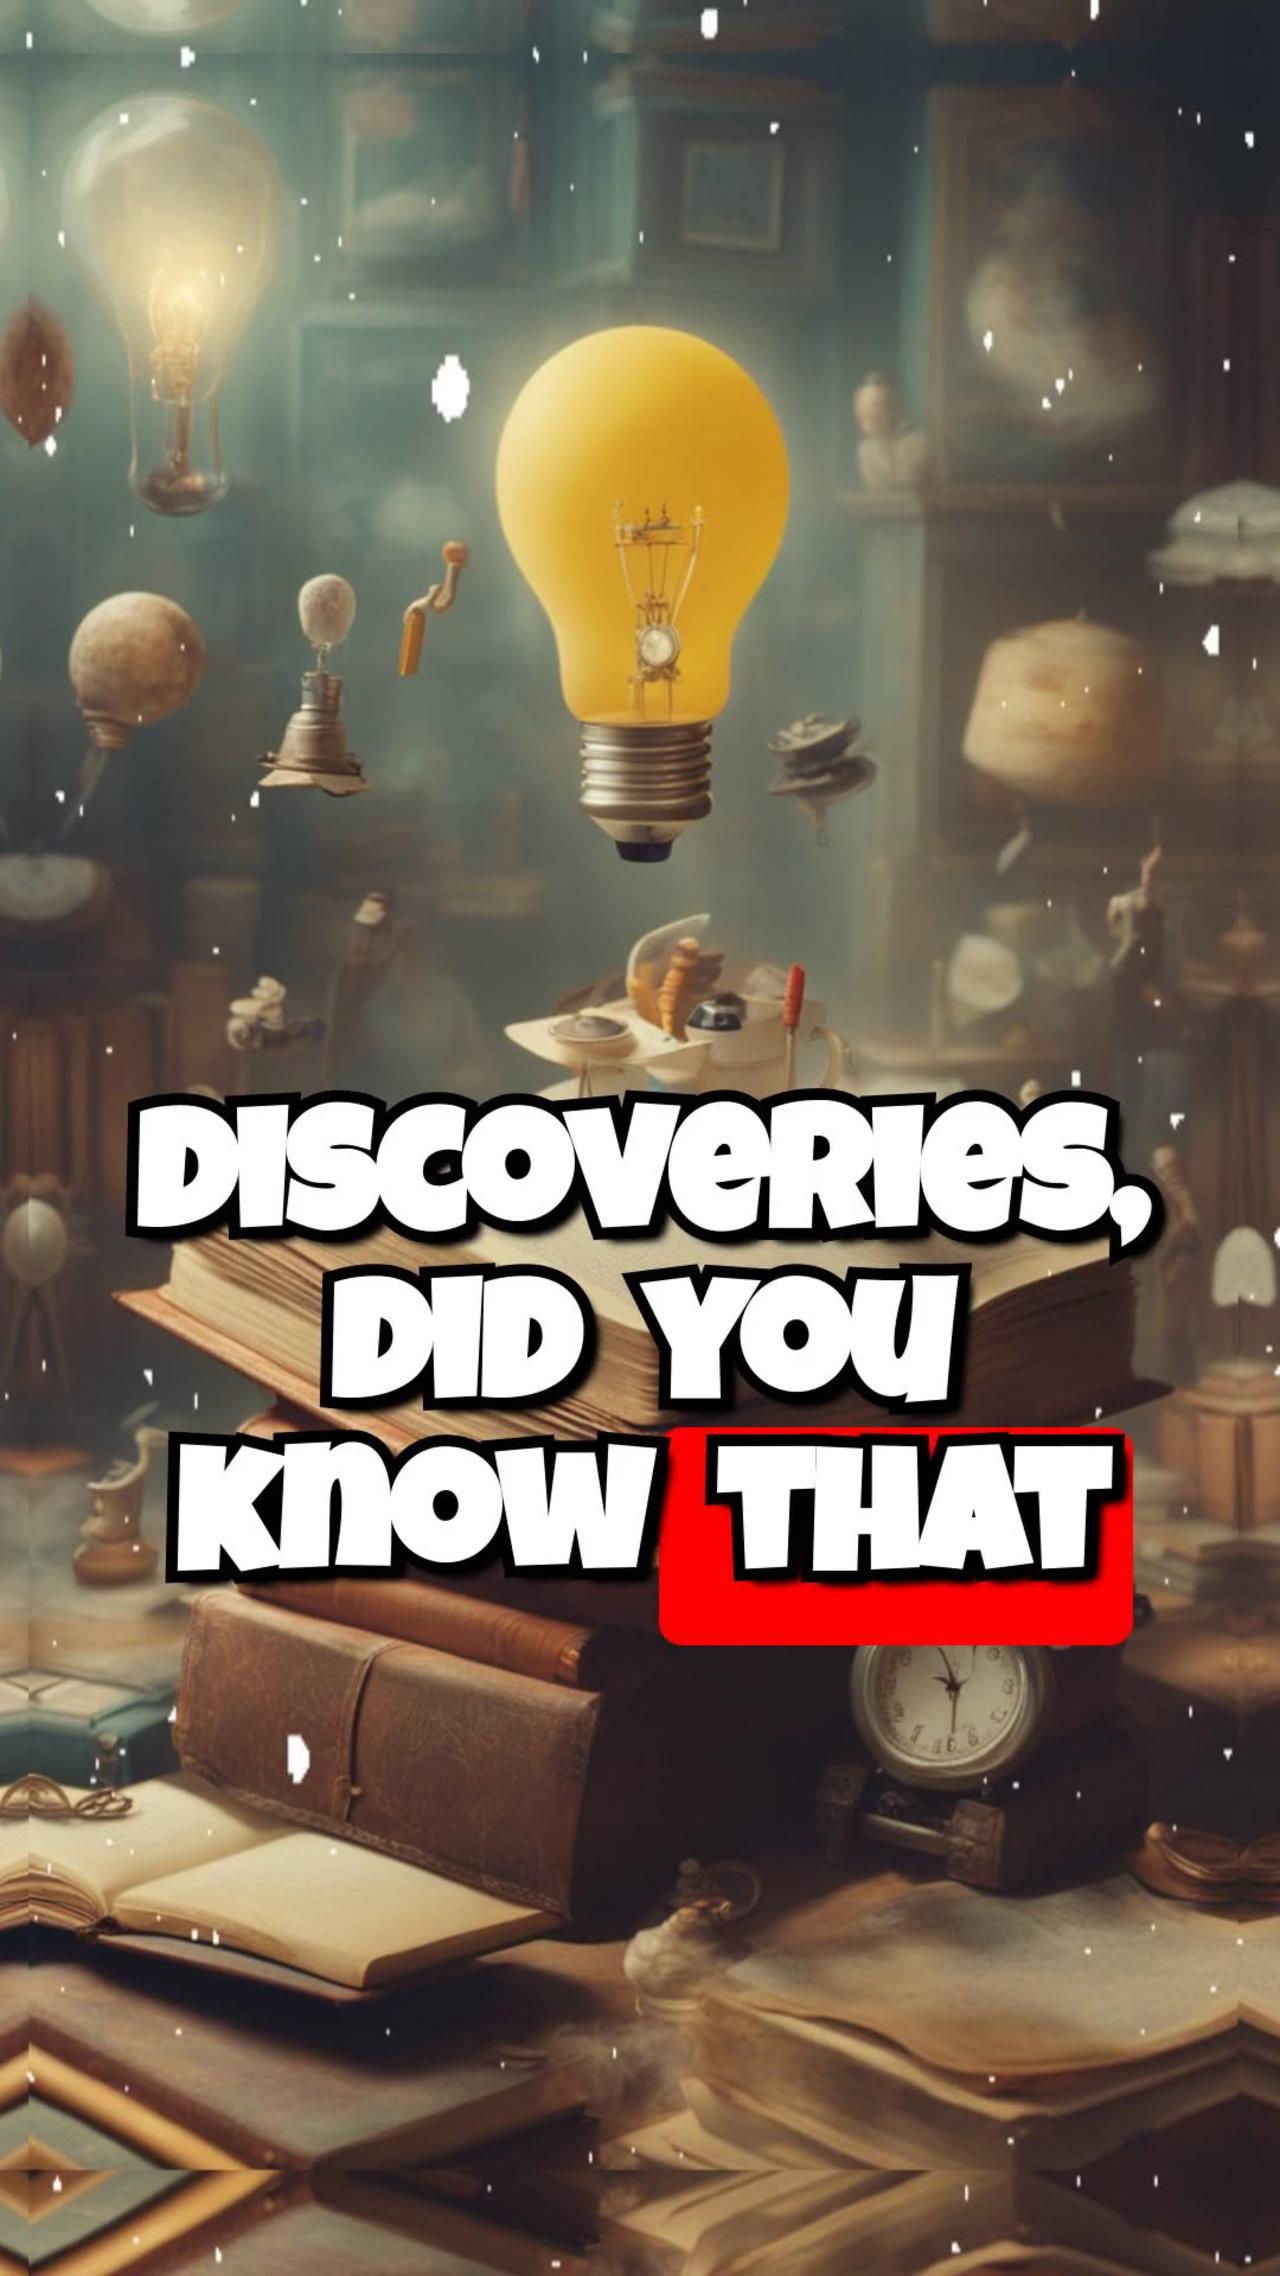 5 Mind-Blowing Historical Facts You Won't Believe